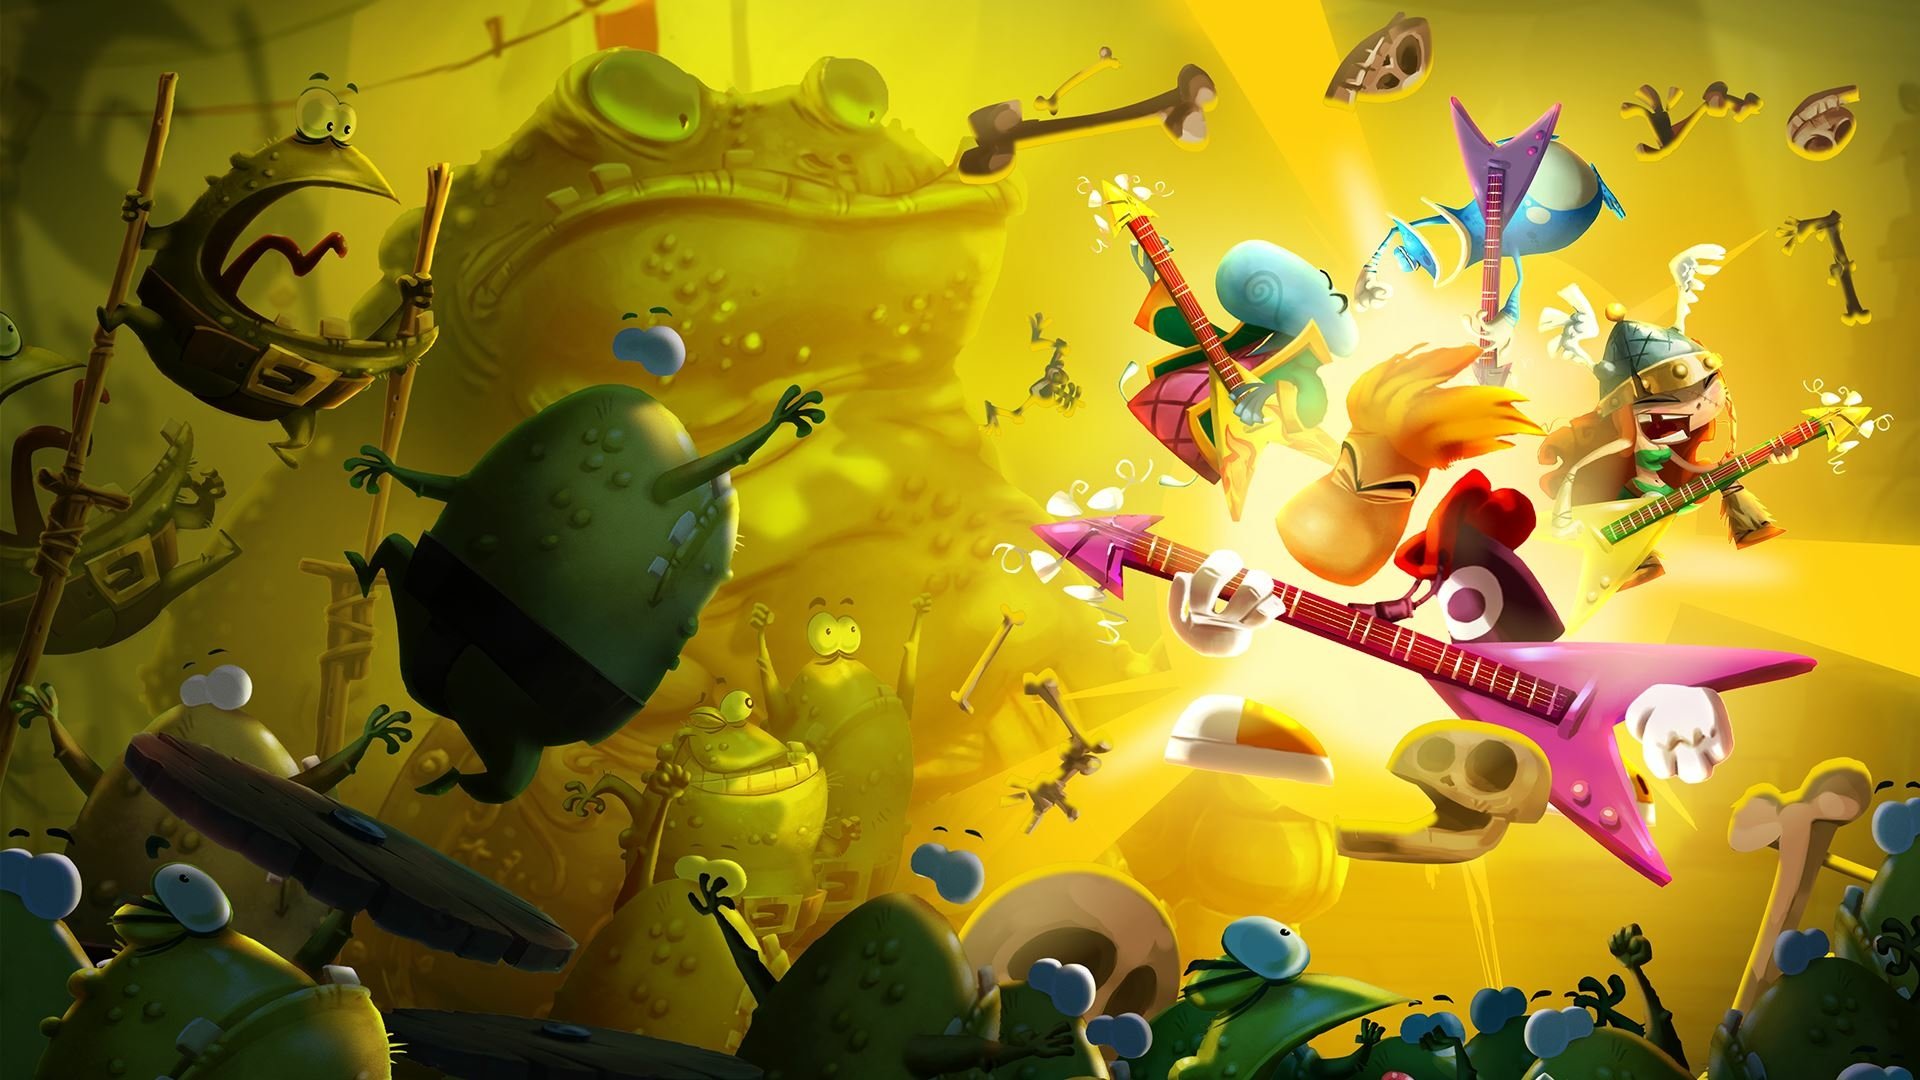 download rayman legends full game